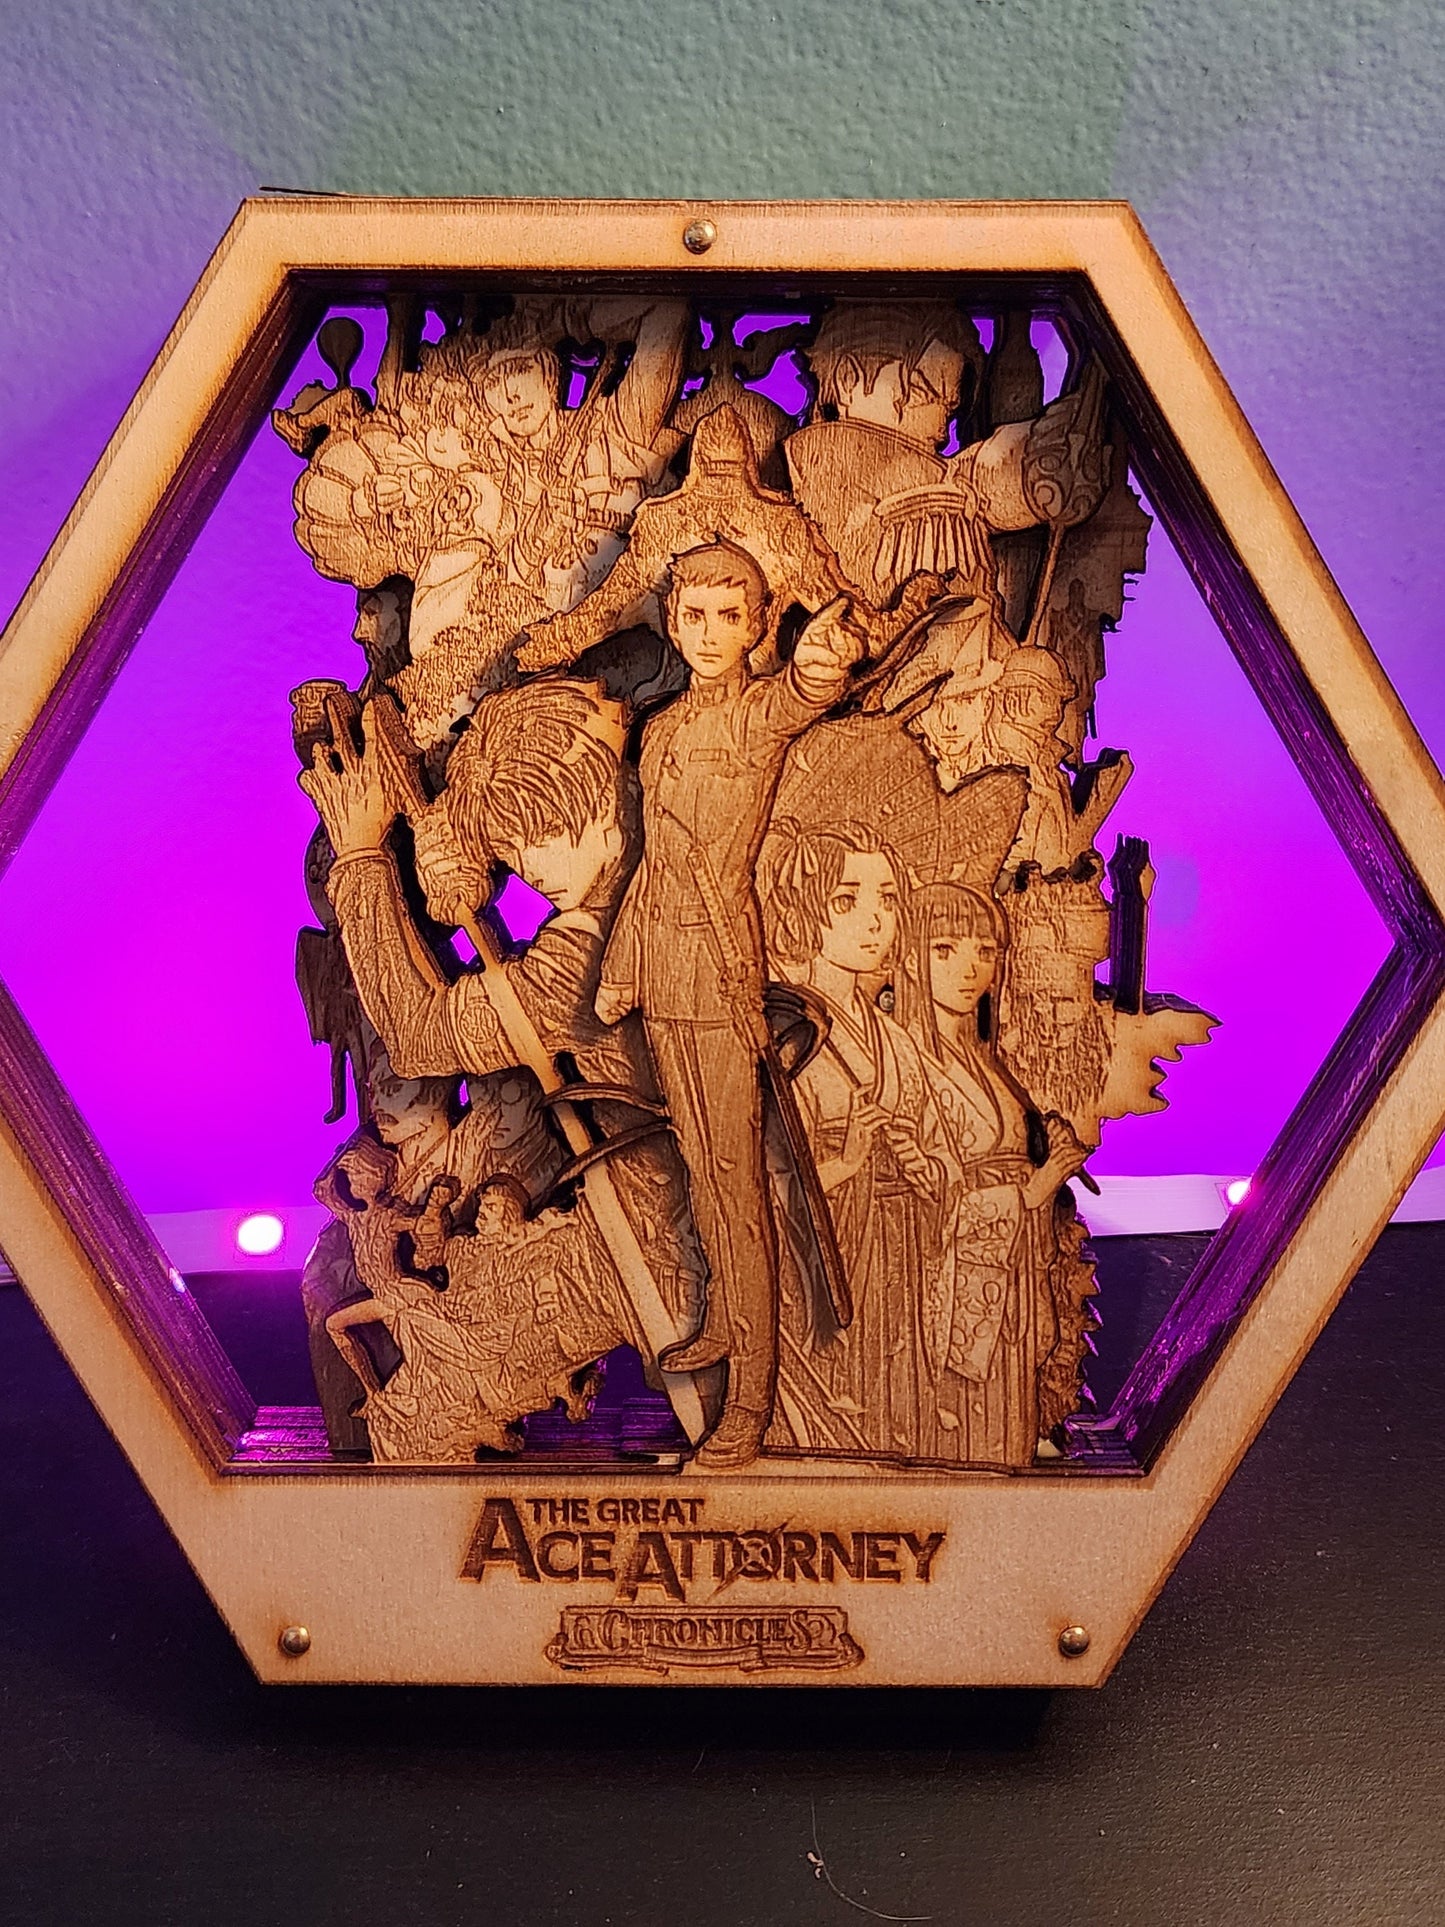 Ace Attorney - The Great Ace Attorney | 3D Wooden Artwork PlaqueArts | Unforgettable gift for gamers